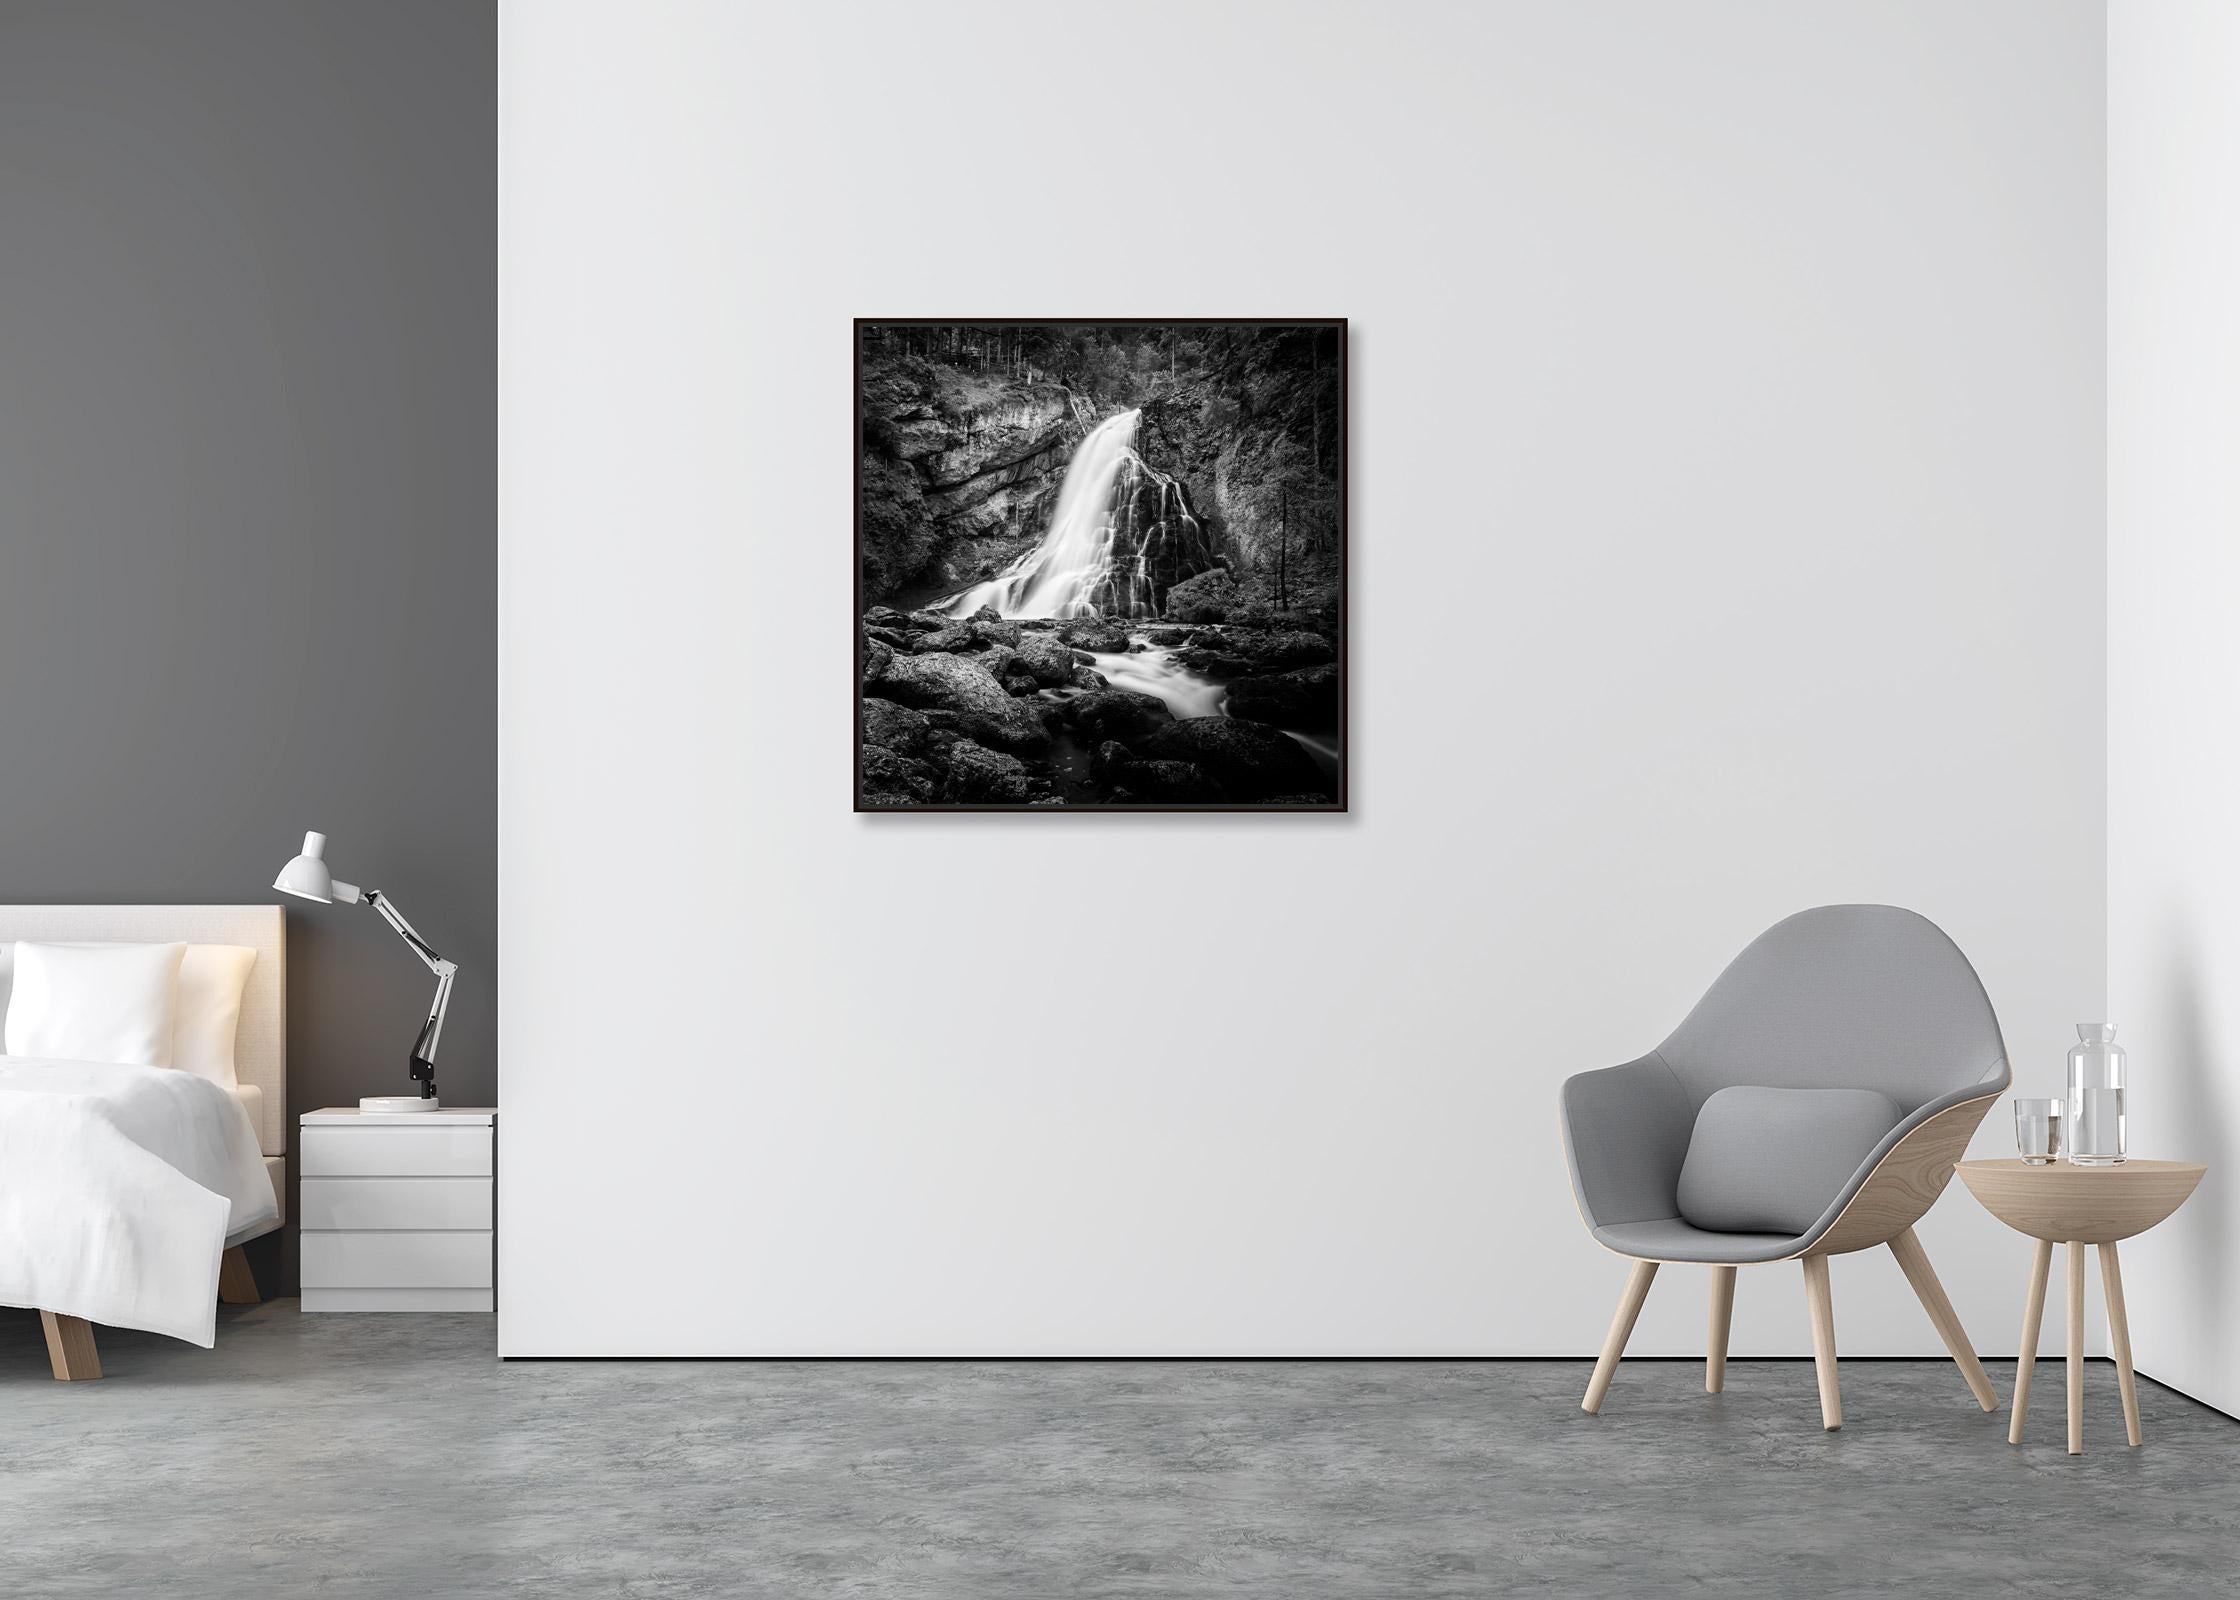 Waterfall, Mountain Stream, black white long exposure fine art landscape photo - Contemporary Photograph by Gerald Berghammer